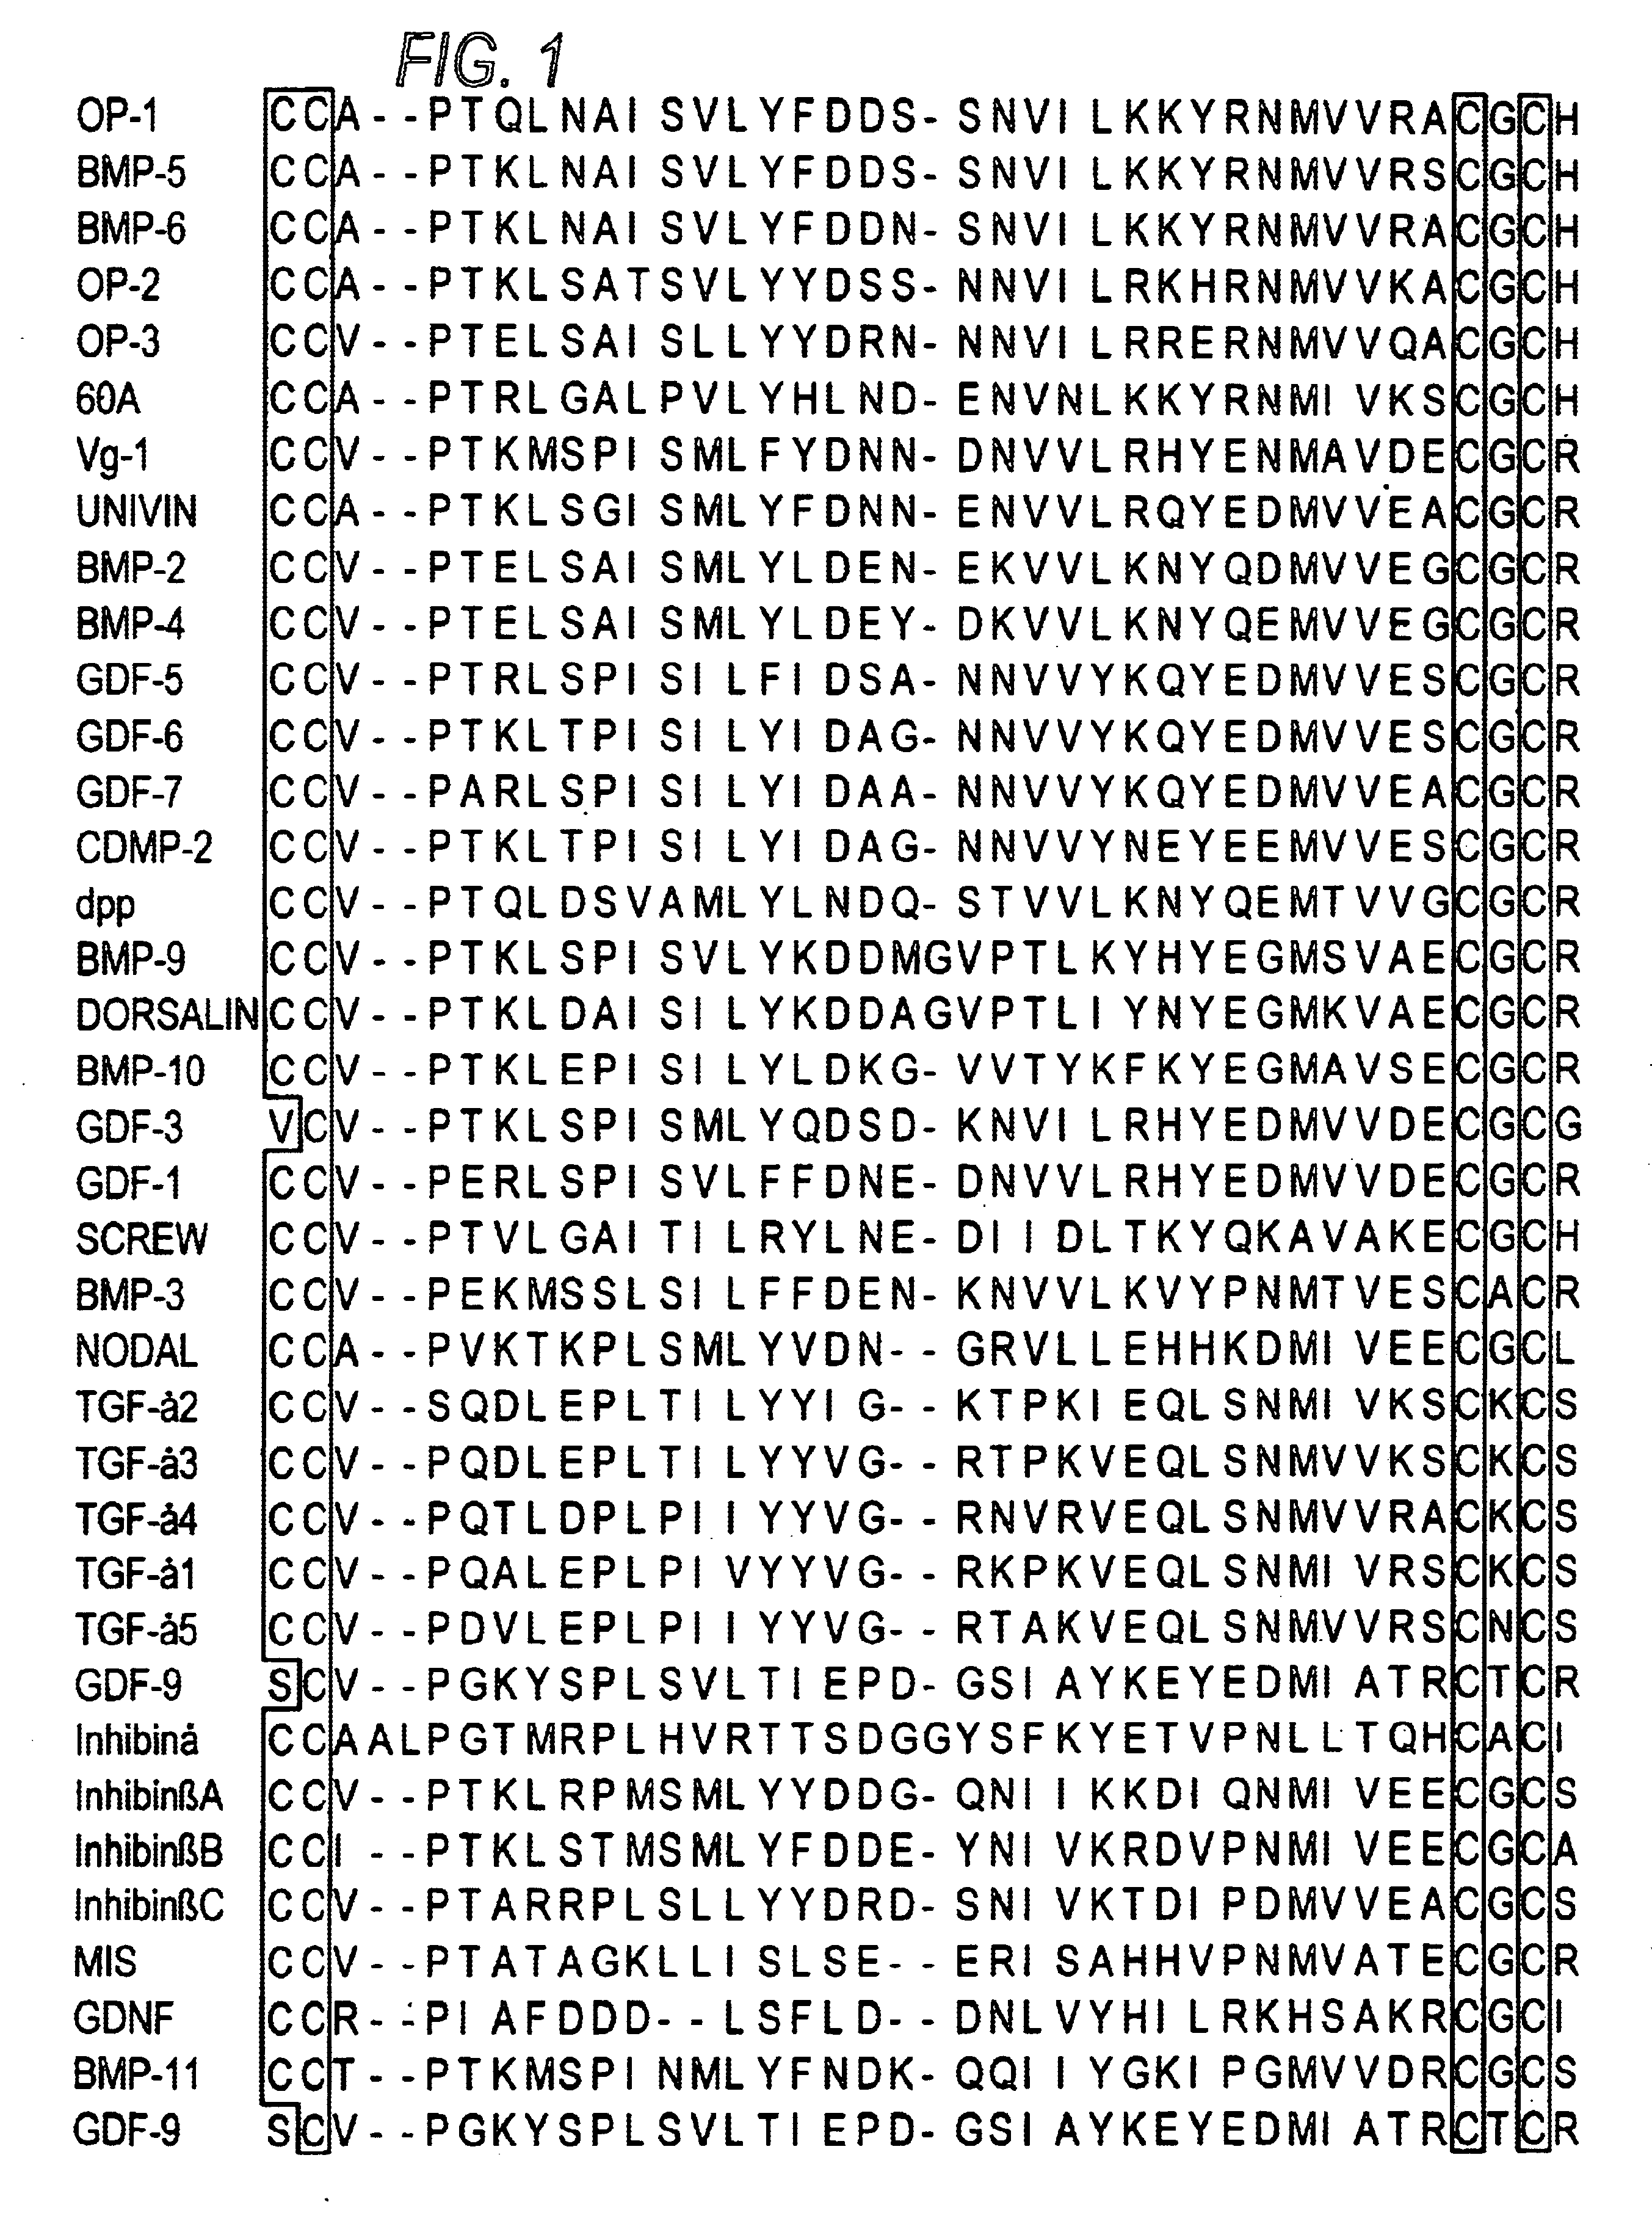 Modified proteins of the TGF-β superfamily, including morphogenic proteins